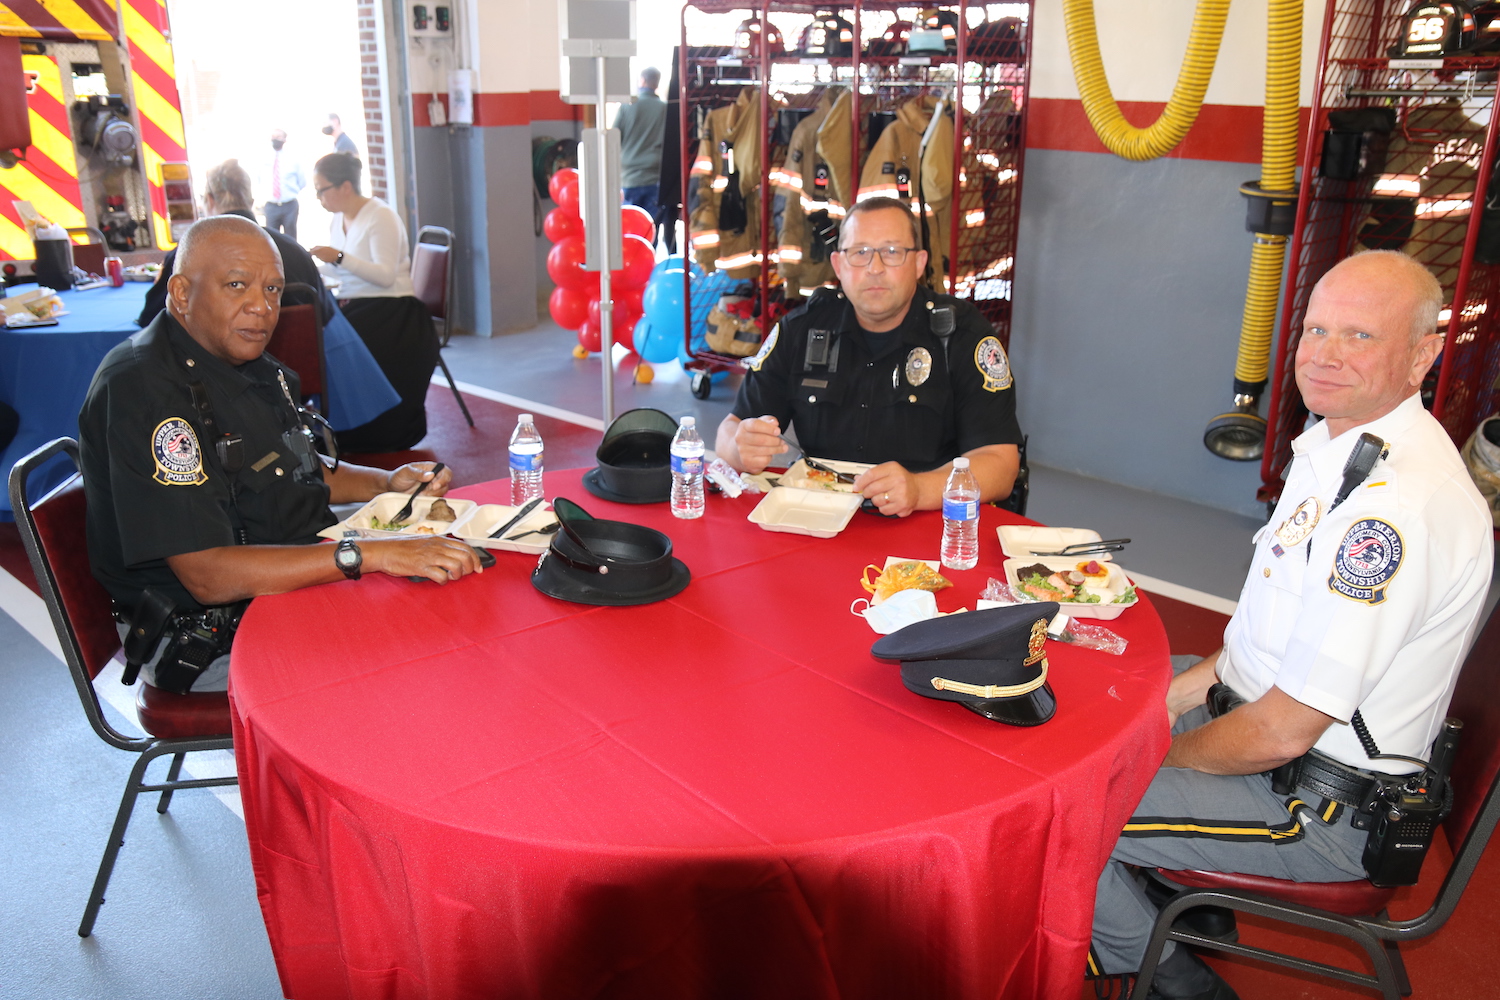 three police officers sitting at a table smiling